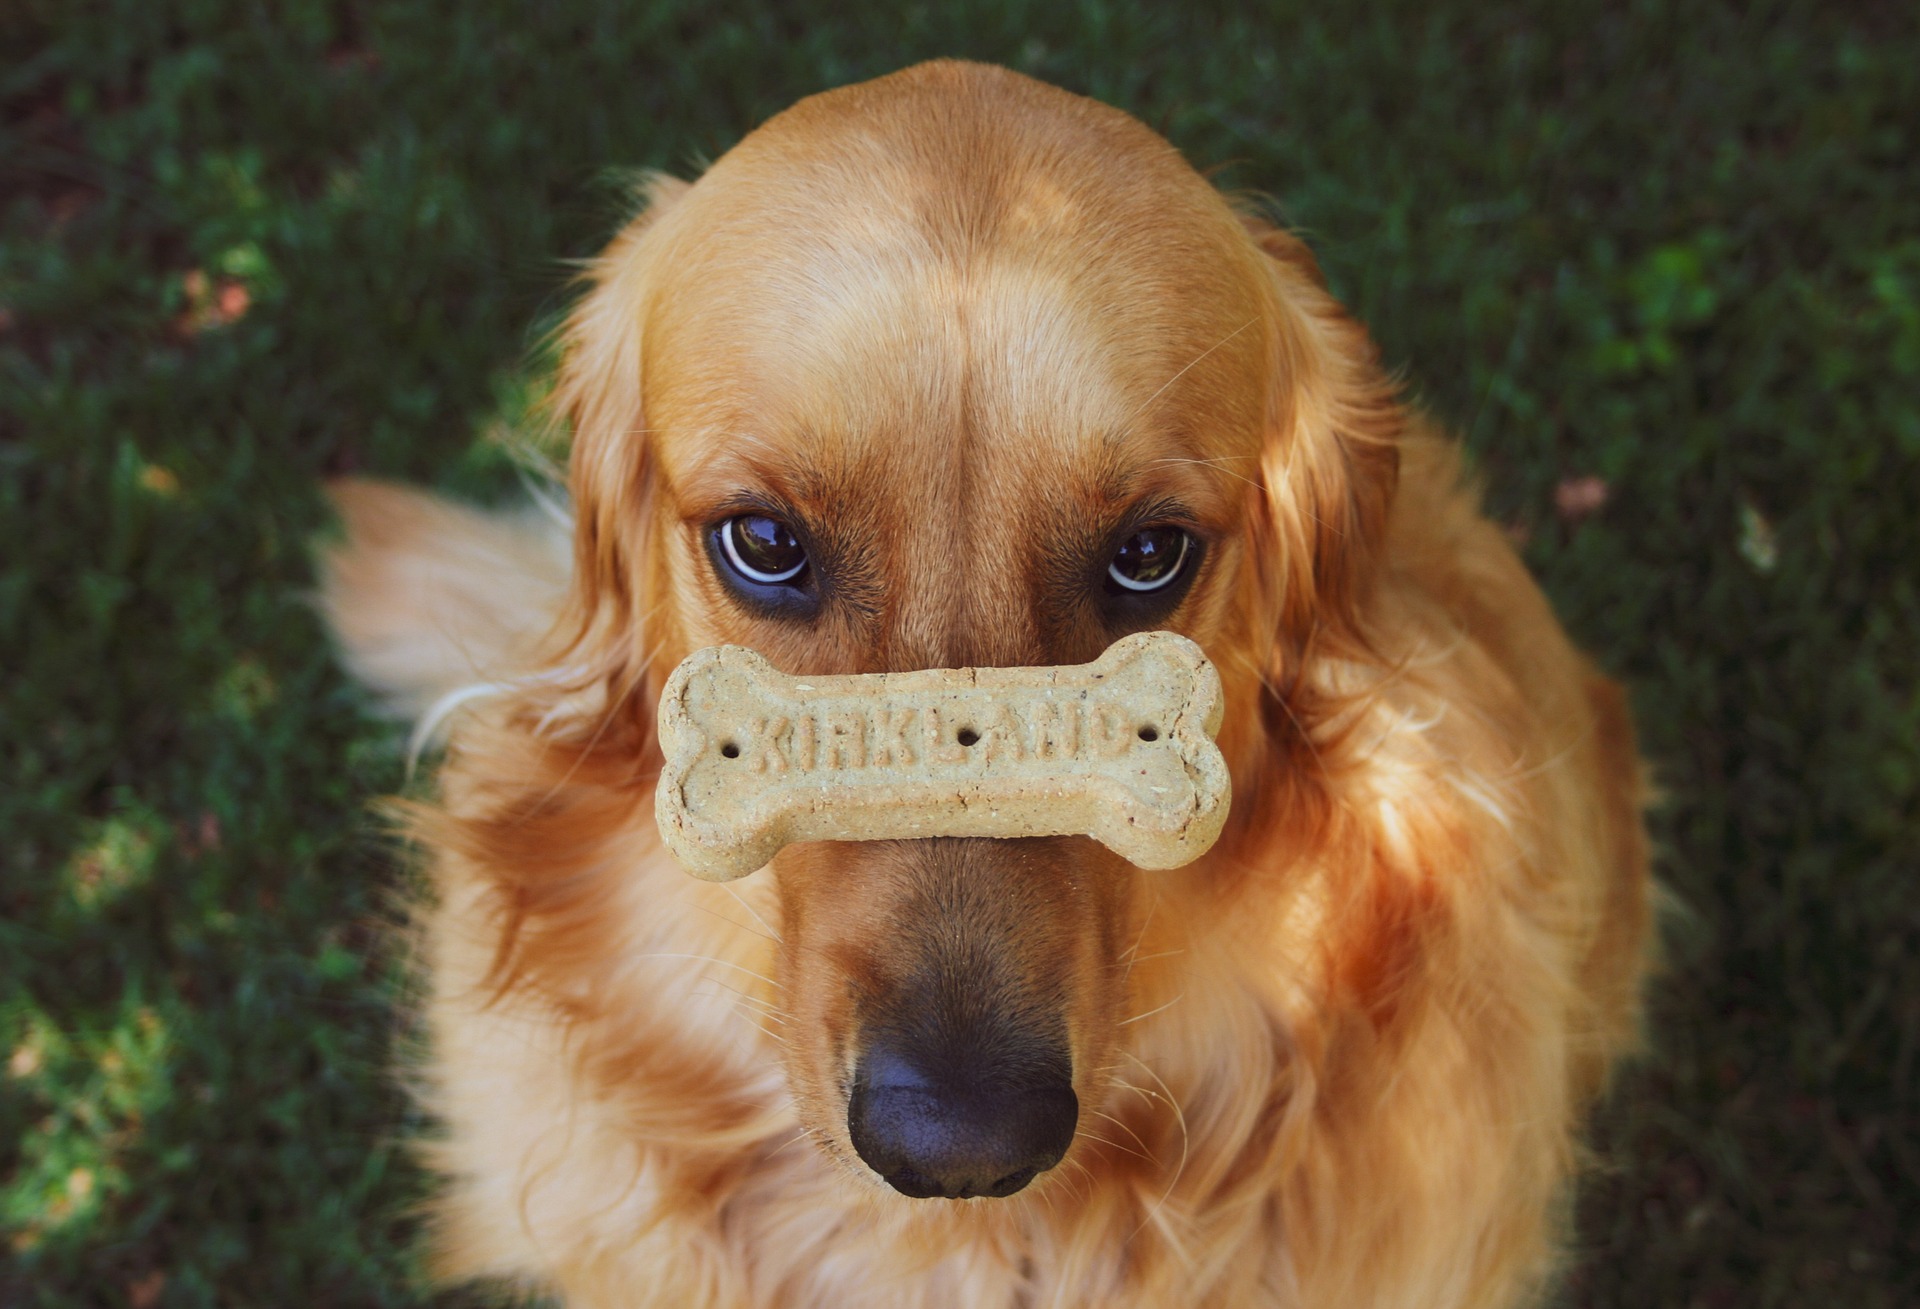 Good dog showing restraint for his bone